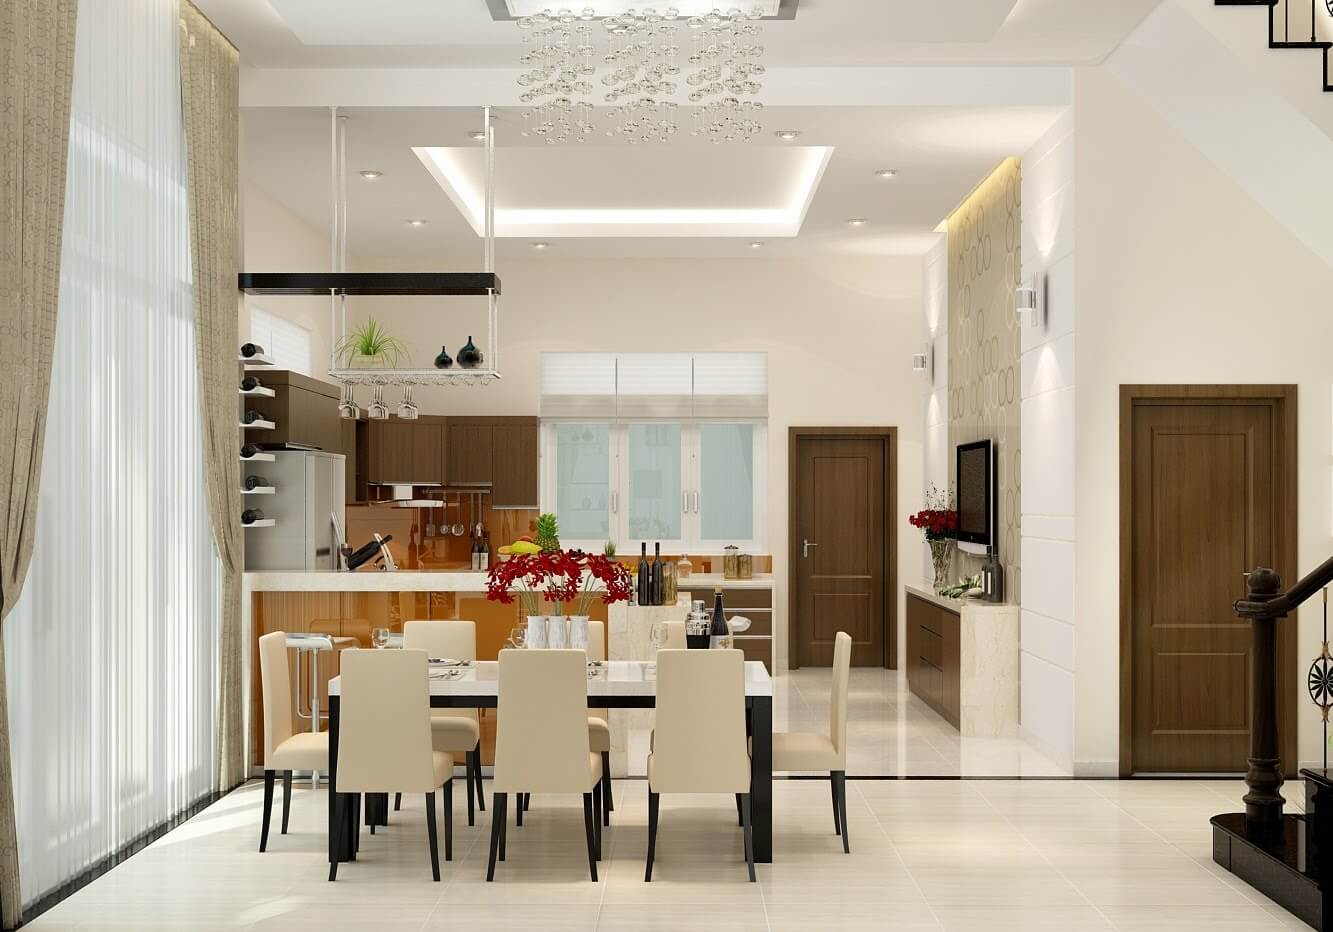 A dining room and kitchen with a chandelier
